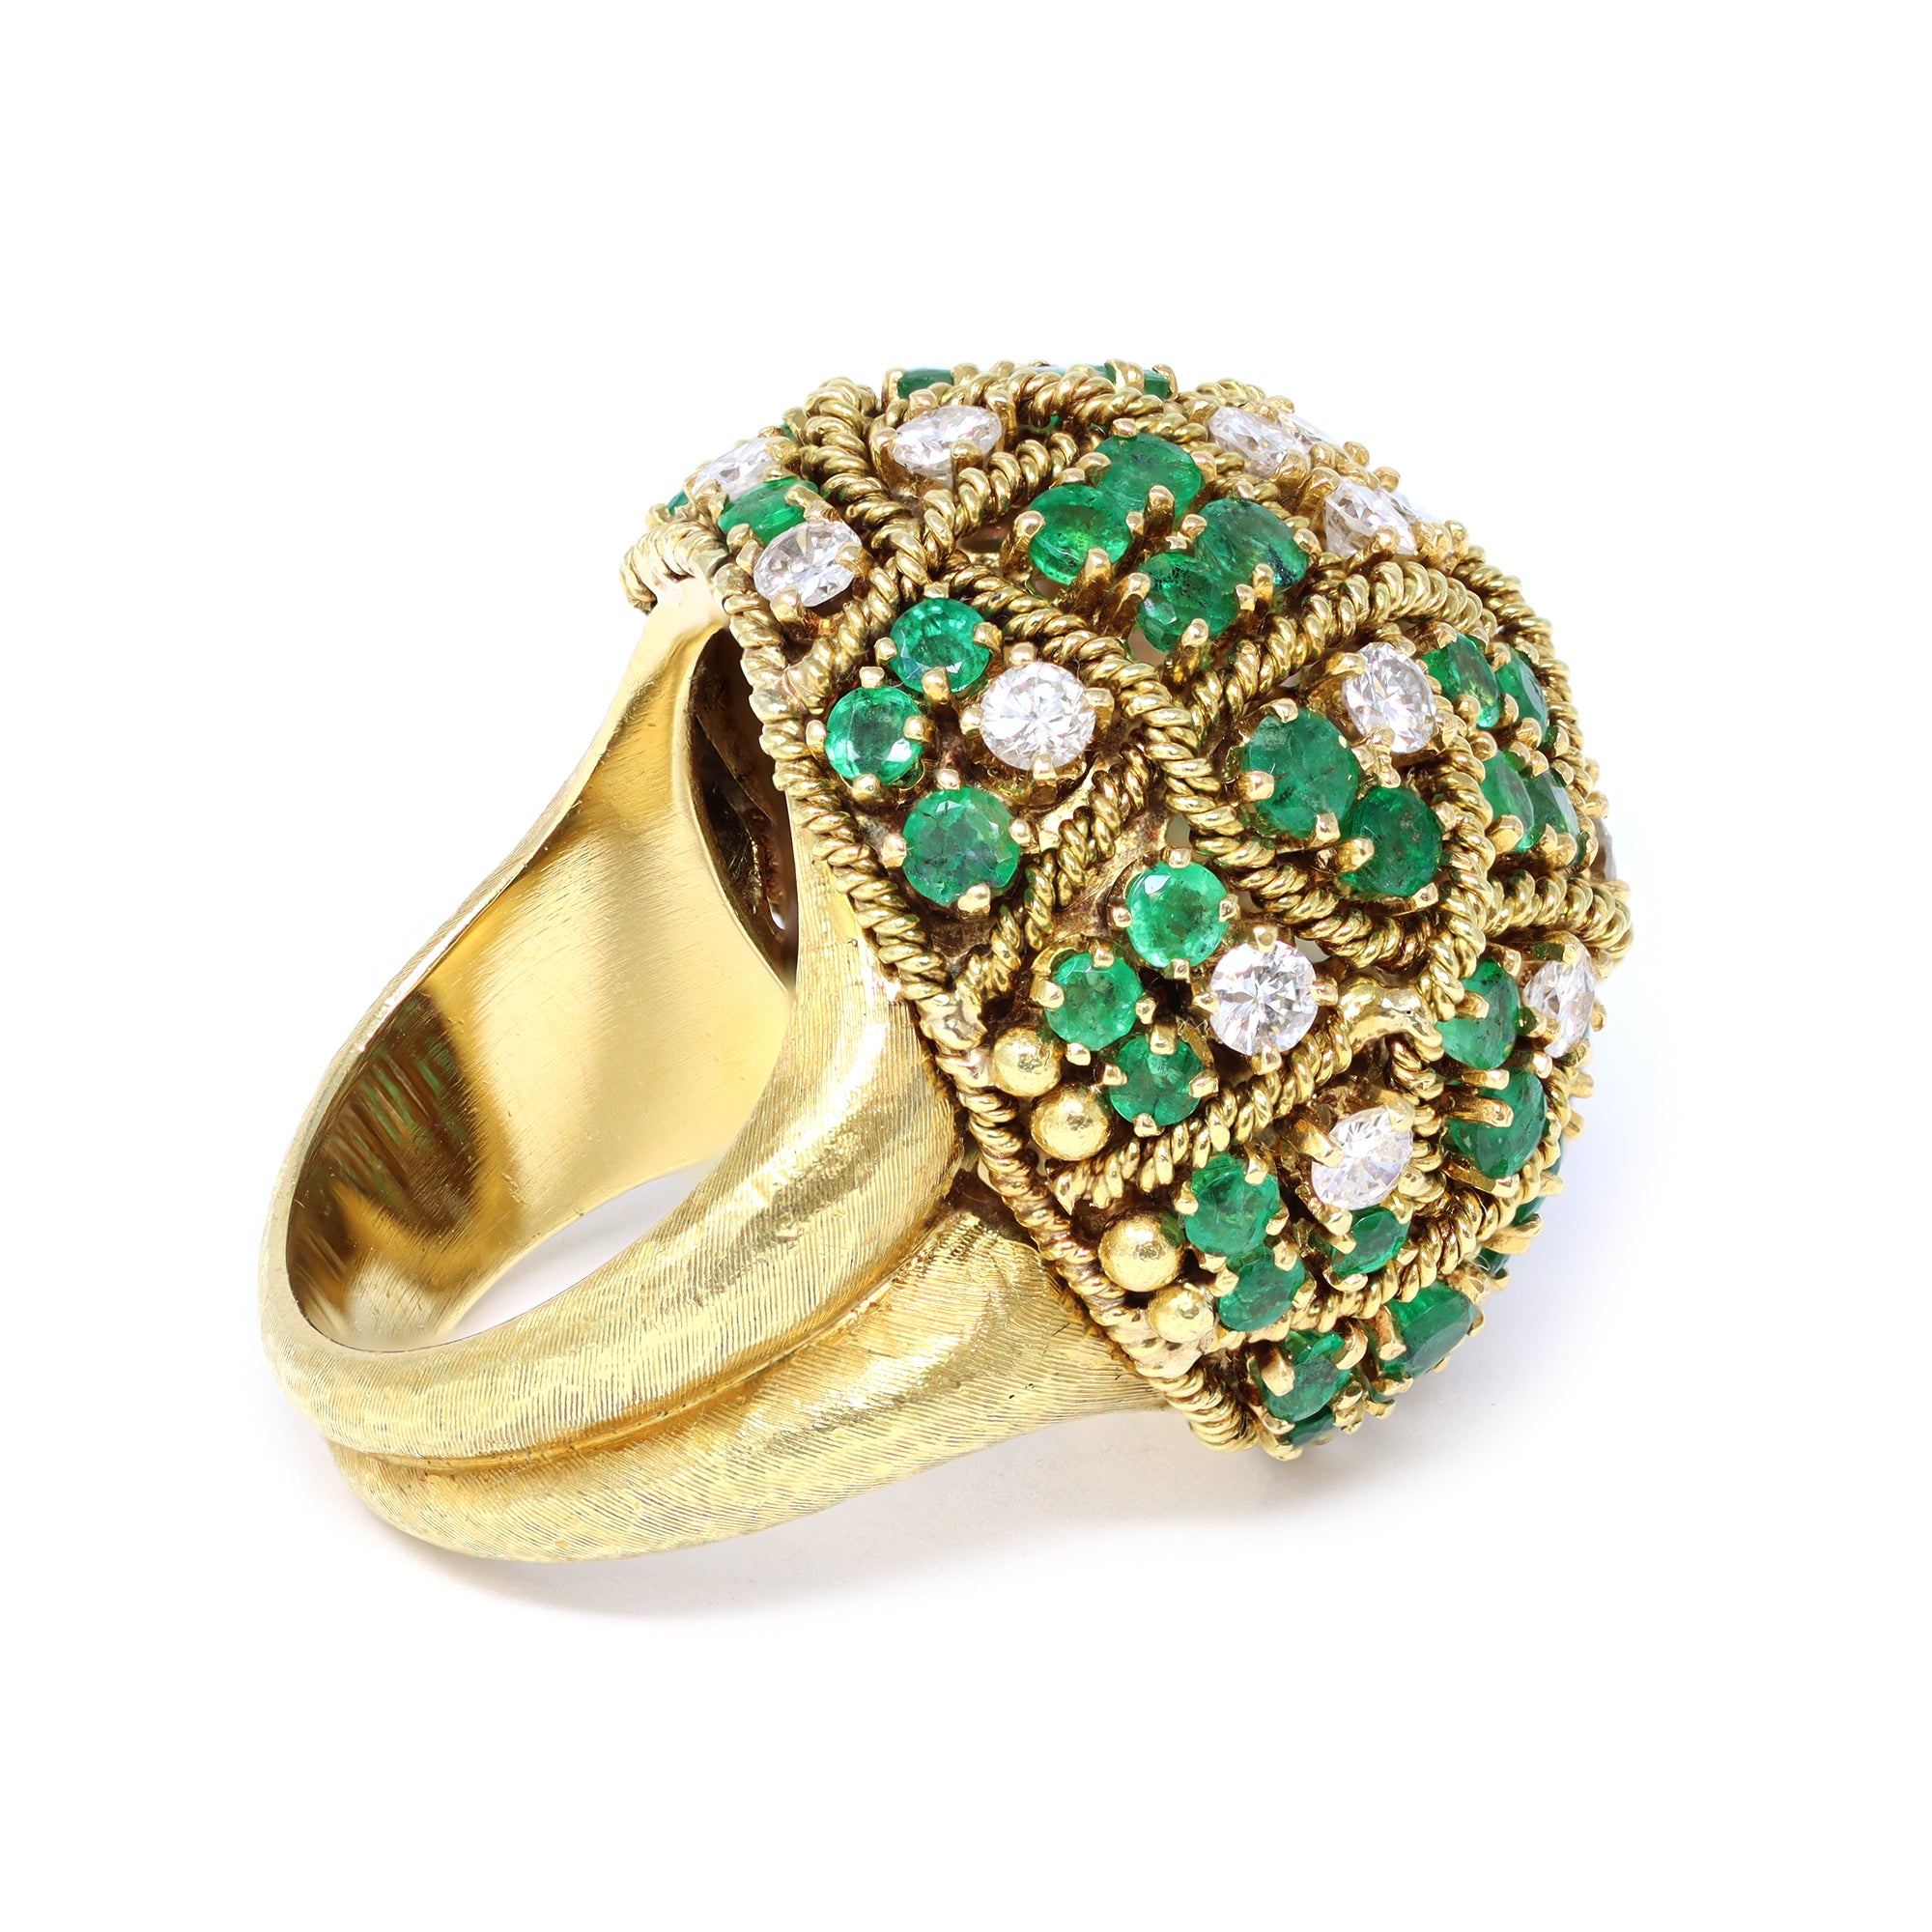 1960s Emerald & Diamond Cocktail Ring set in 18k Yellow Gold